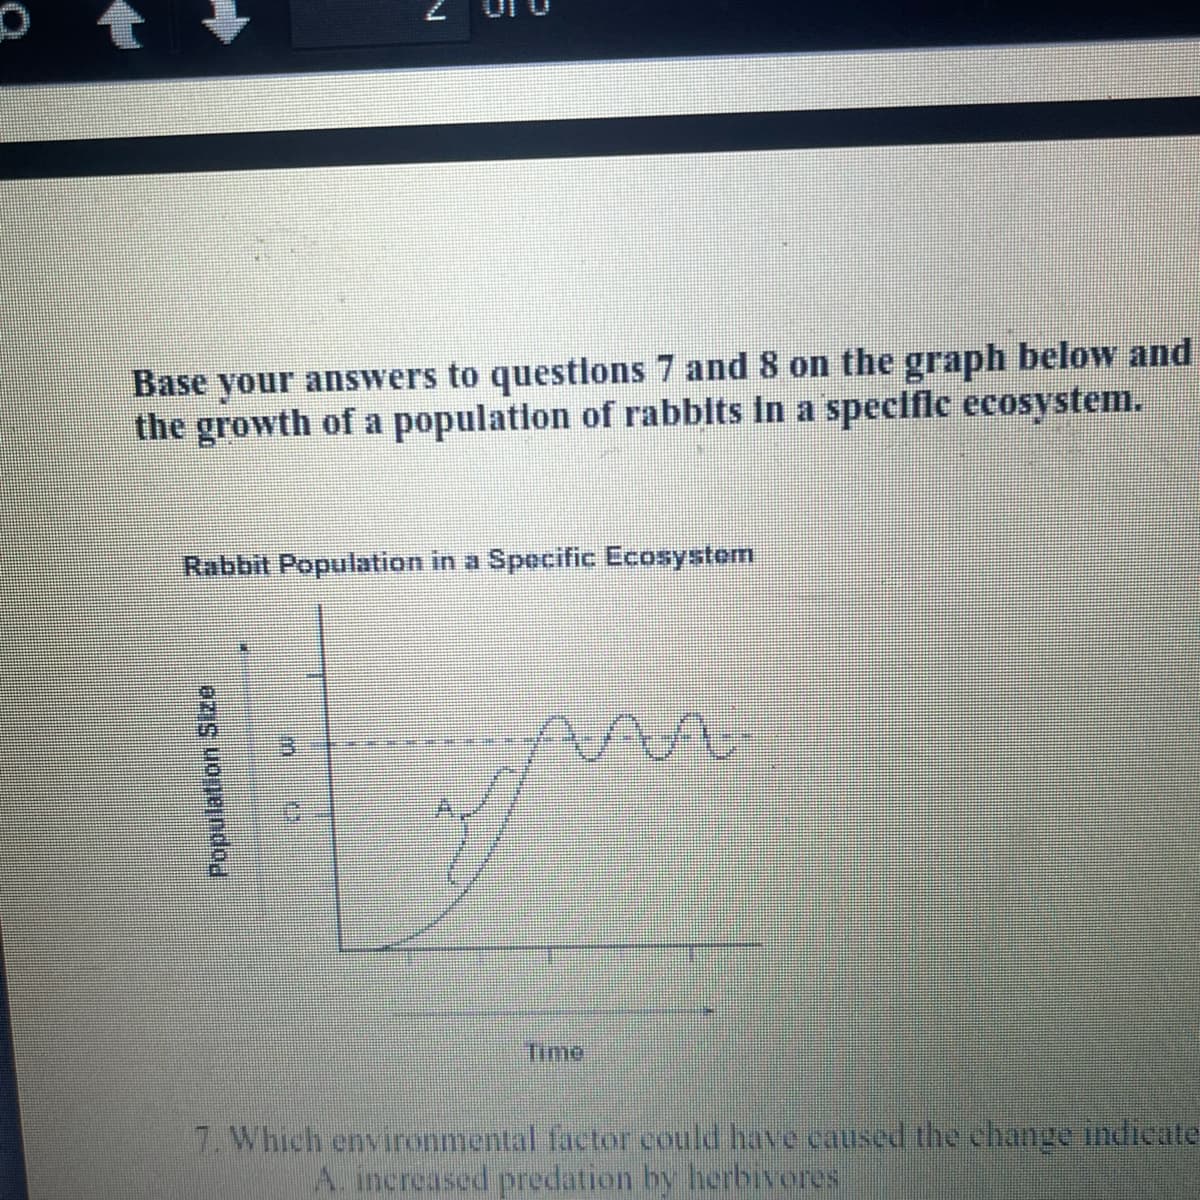 Base your anSwers to questlons 7 and 8 on the graph below and
the growth of a population of rabbits in a specific ecosystem.
Rabbit Population in a Specific Ecosystem
Time
7. Which environmental factor could have caused the change indicate
increased predation by herbivores
Population Size
